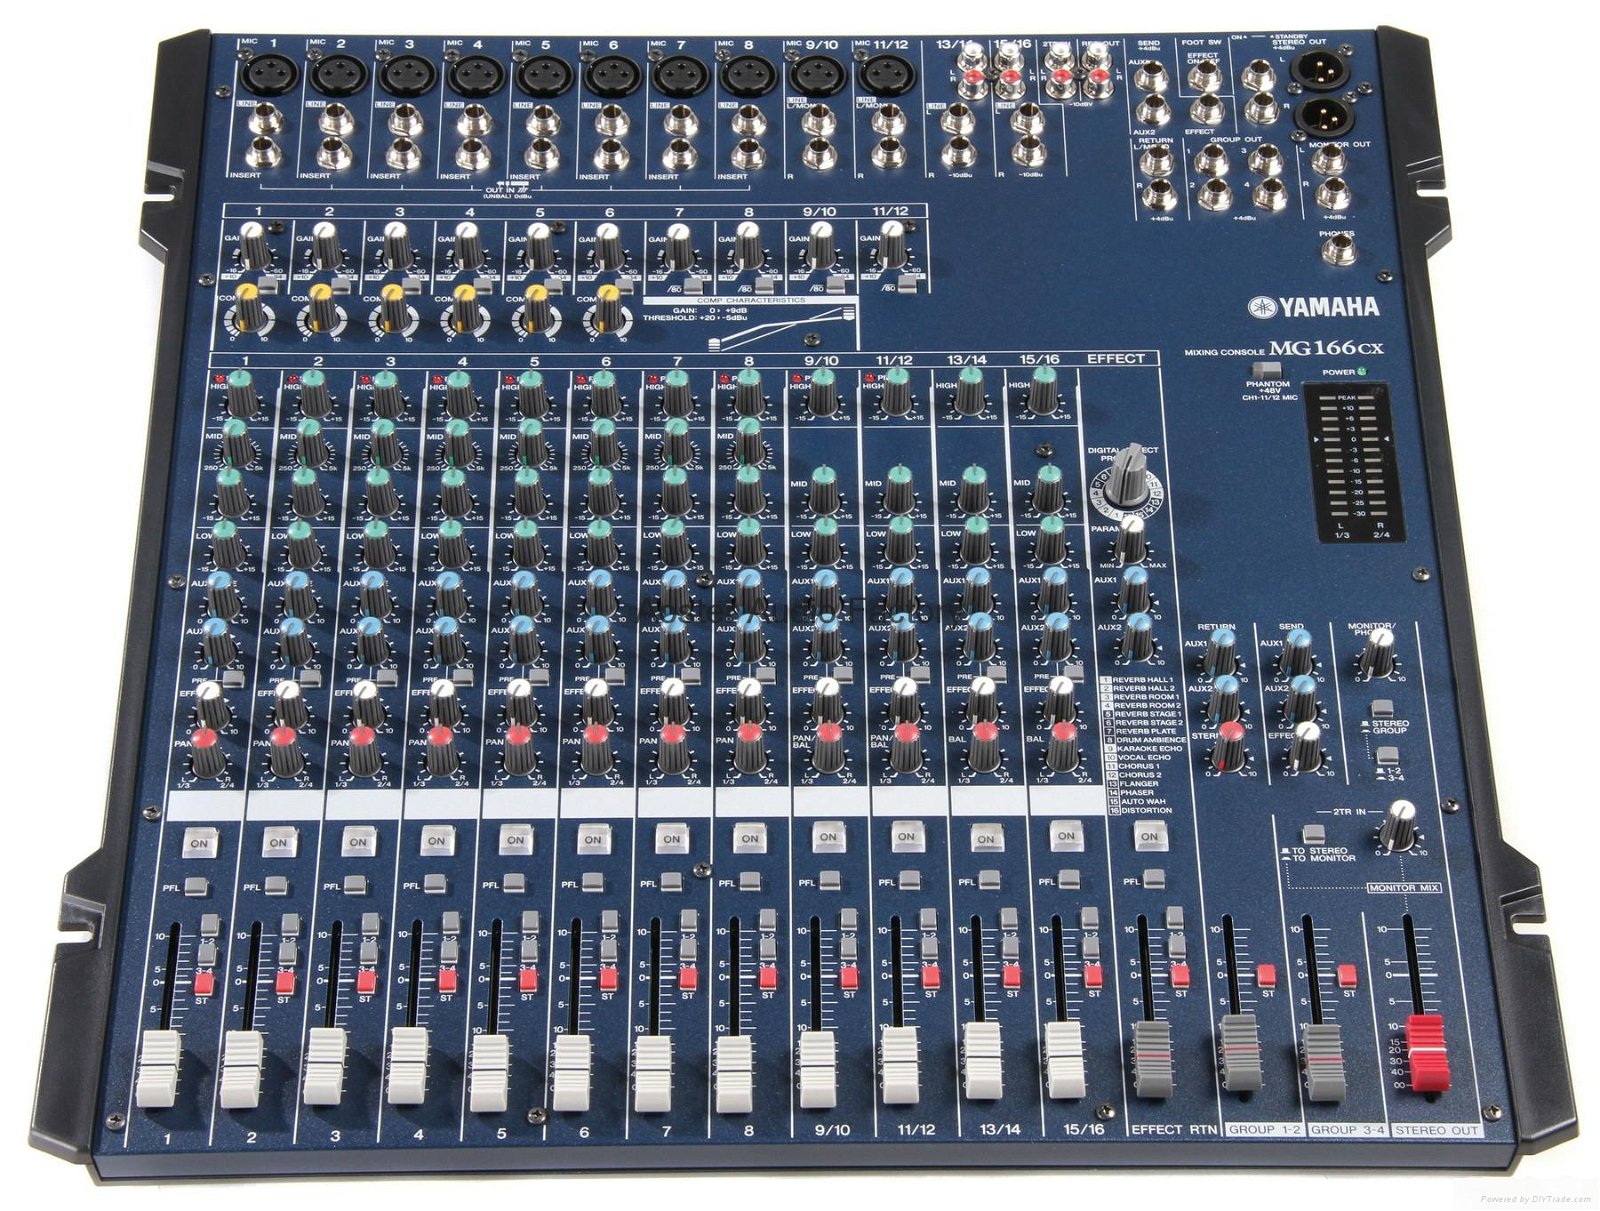 Yamaha MG166CX 16-channel Live Mixer with Digital Effect - China -